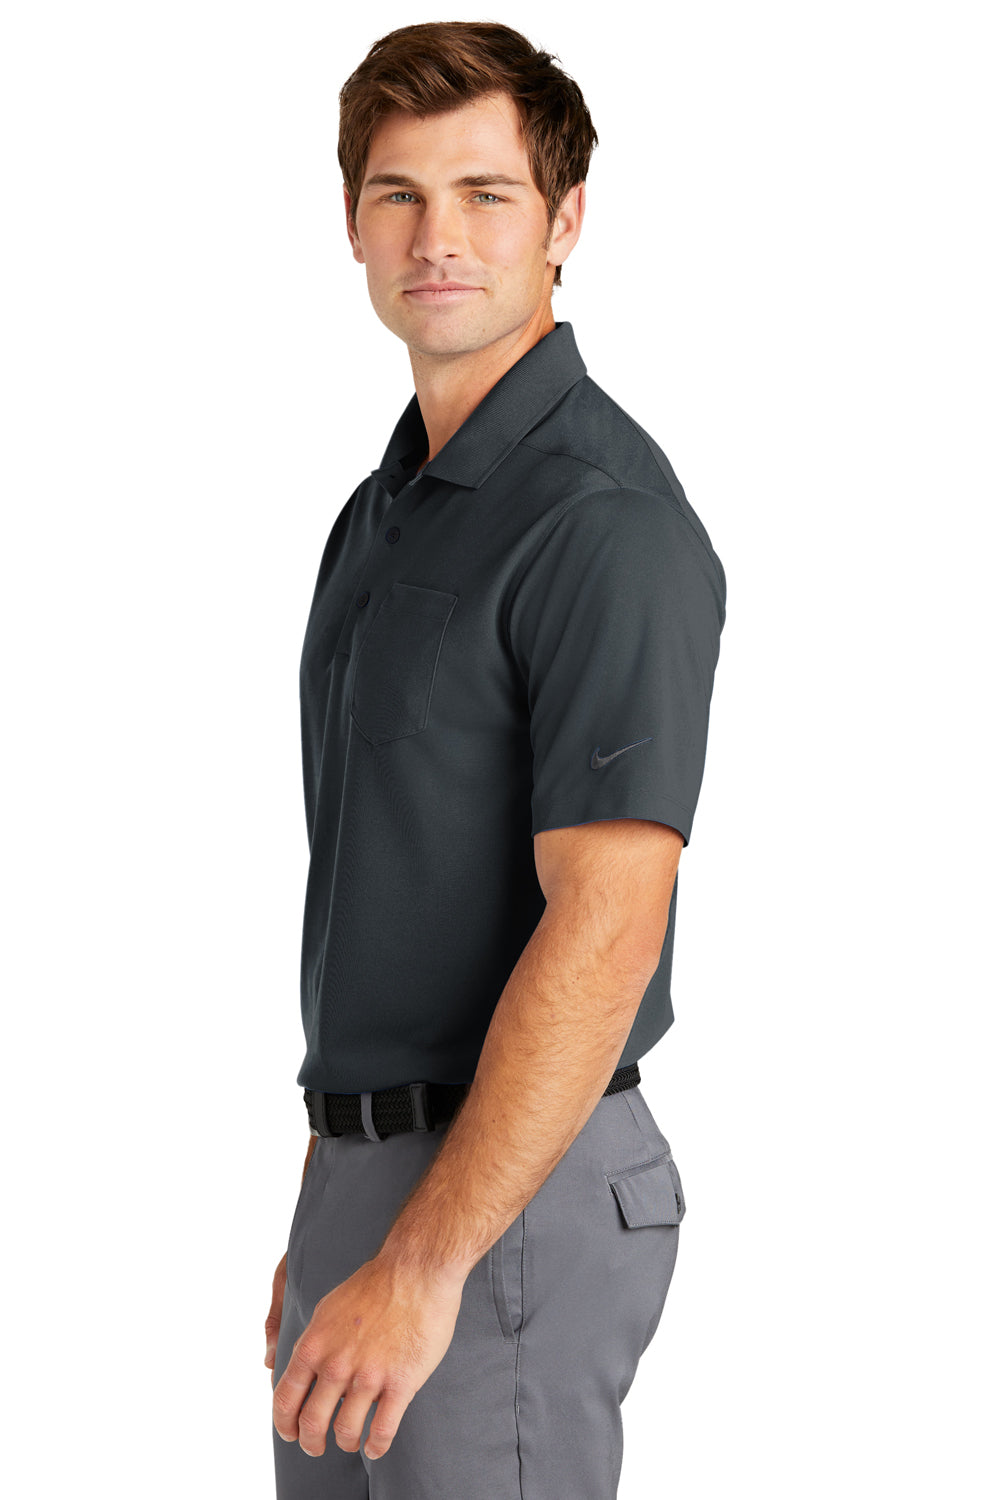 Nike NKDC2103 Mens Dri-Fit Moisture Wicking Micro Pique 2.0 Short Sleeve Polo Shirt w/ Pocket Anthracite Grey Model Side